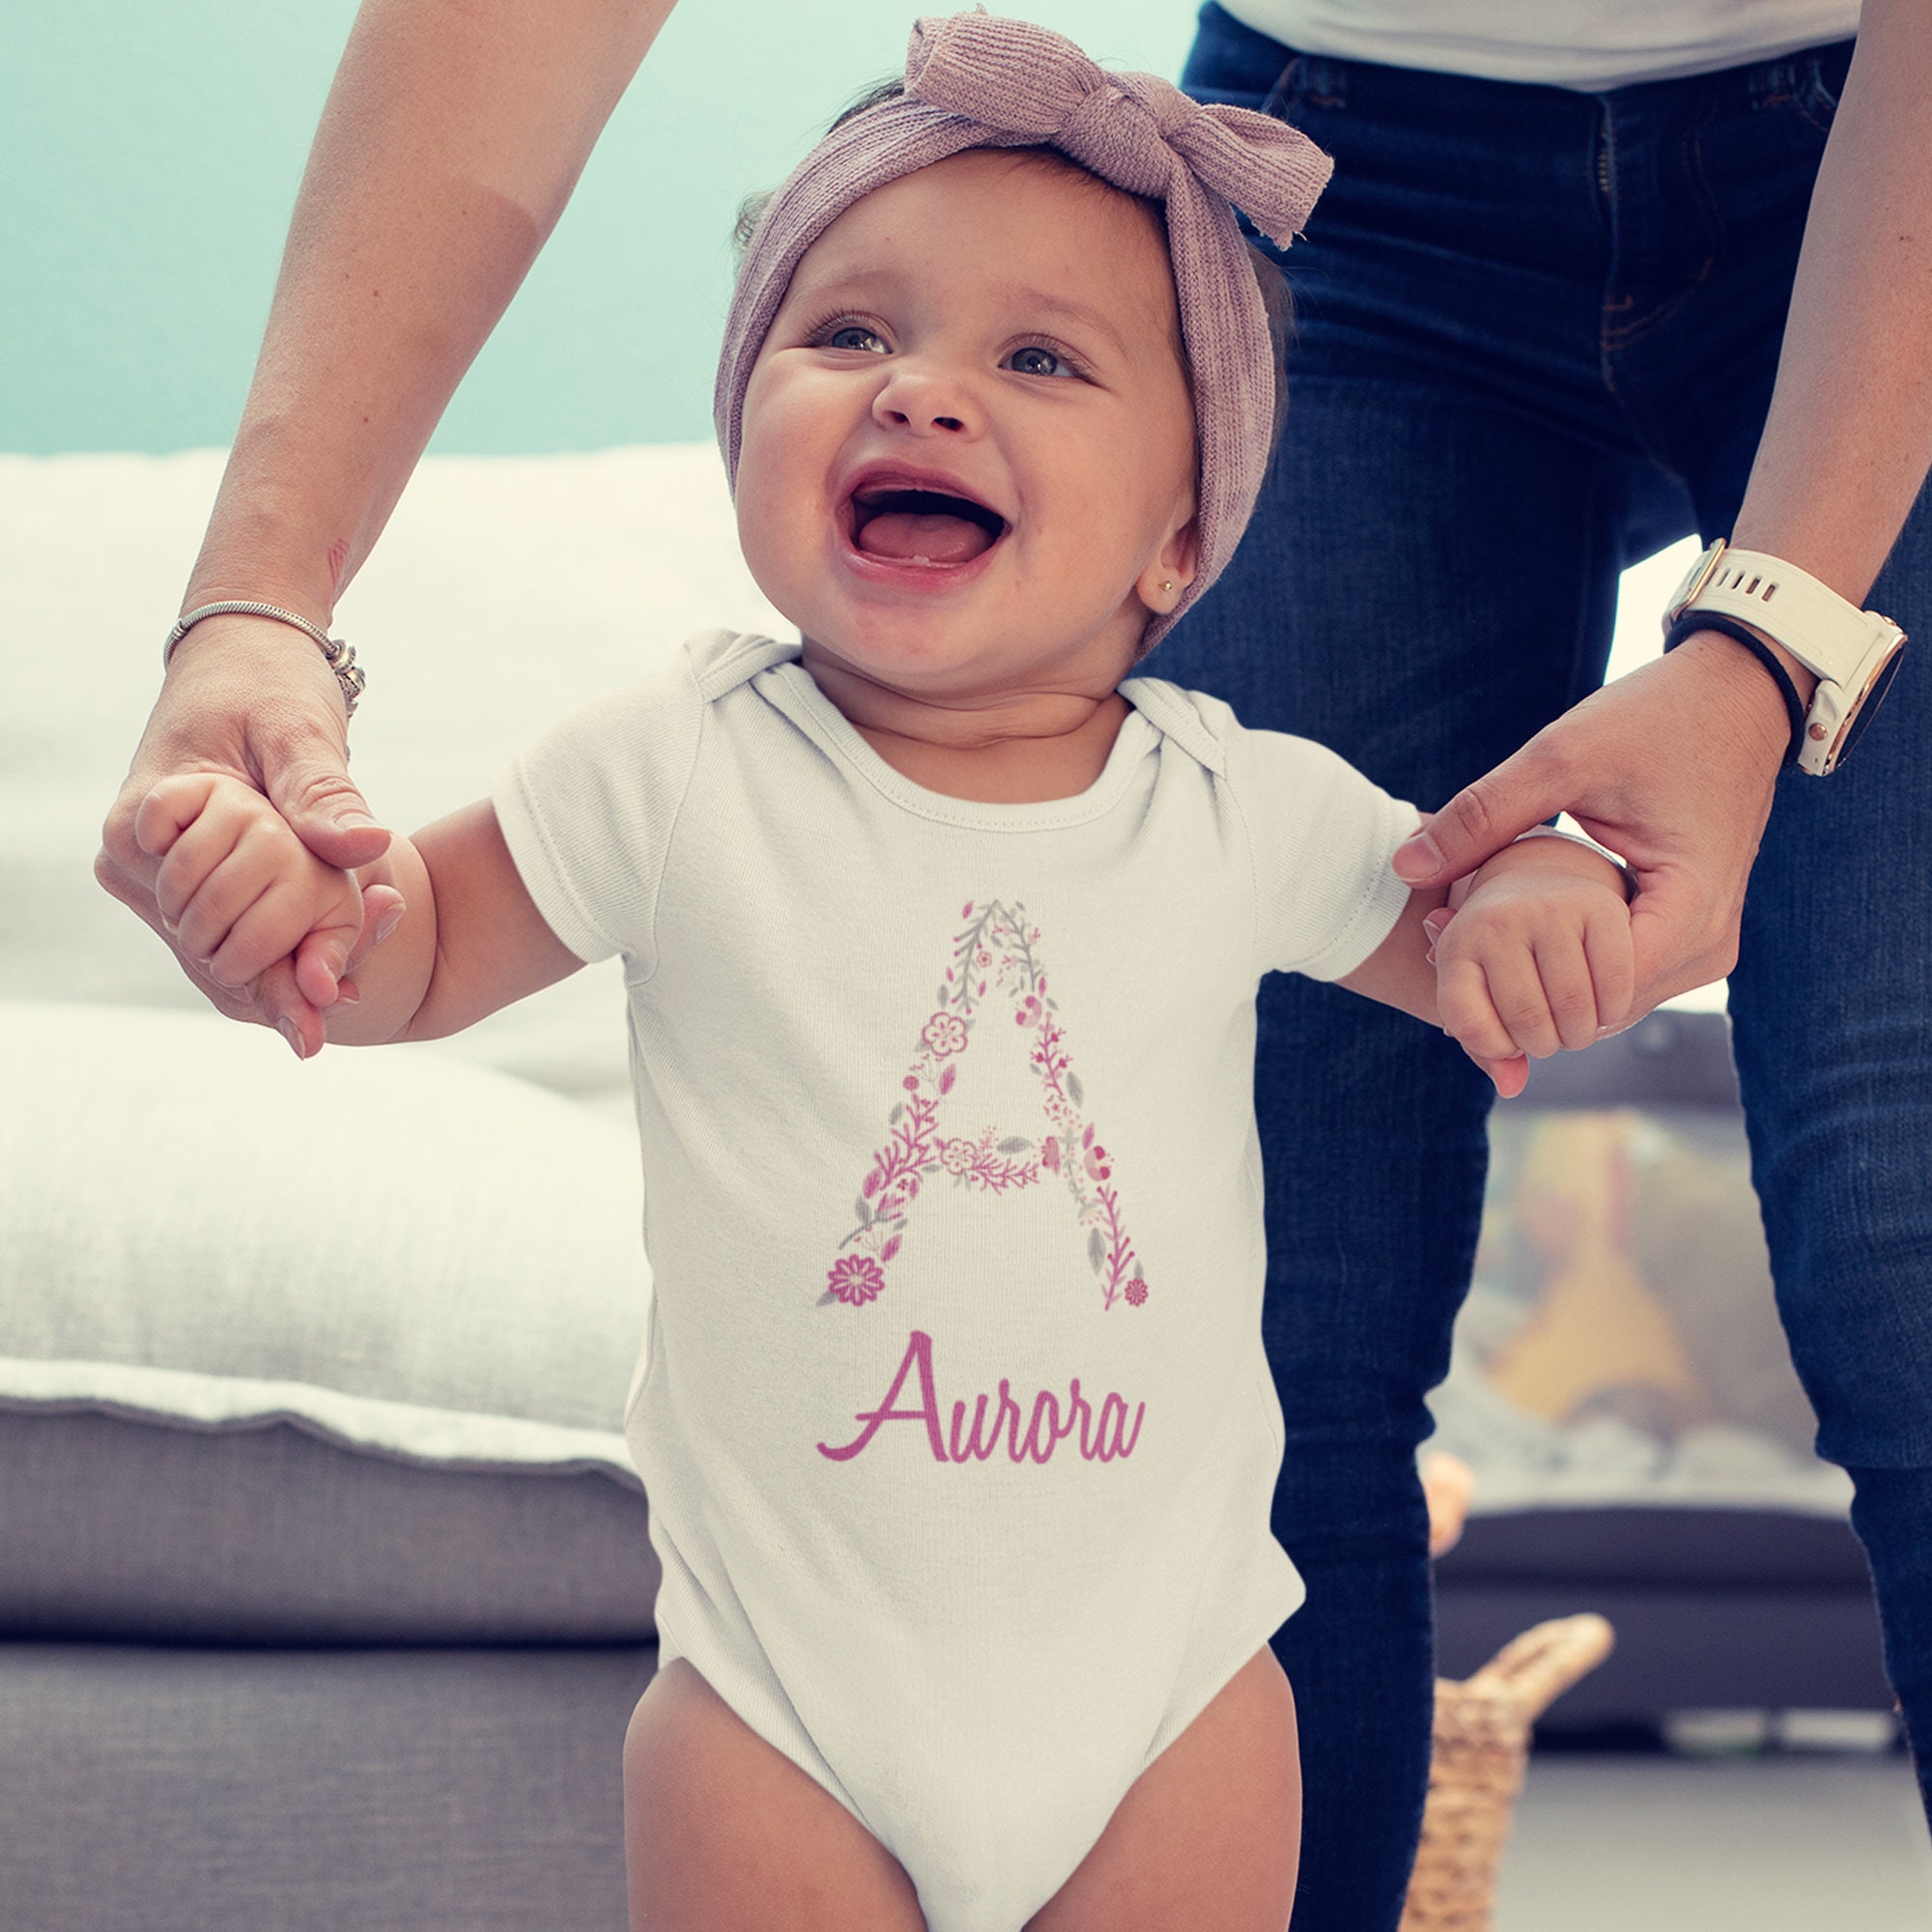 Personalized Baby Girl Gift Girl Baby Clothes Baby Girl Clothes  Personalized Baby Gift Name Shirt Gold Glitter Arrow 019